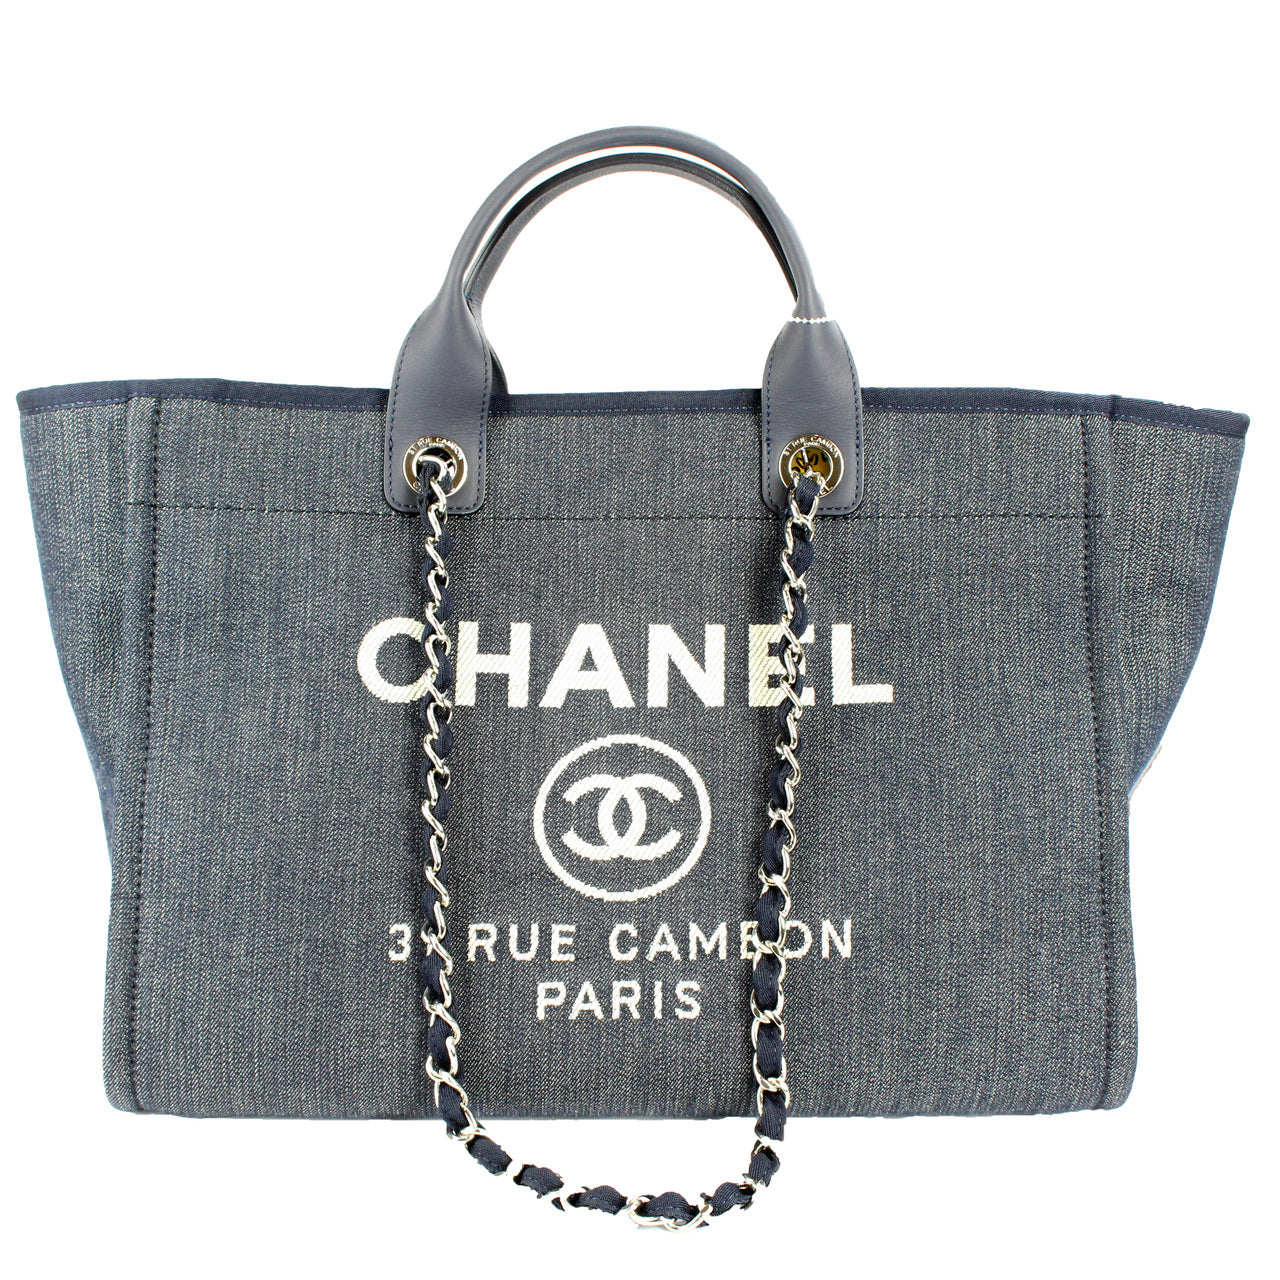 CHANEL DEAUVILLE 3 YEAR REVIEW  WHAT FITS, WEAR AND TEAR 